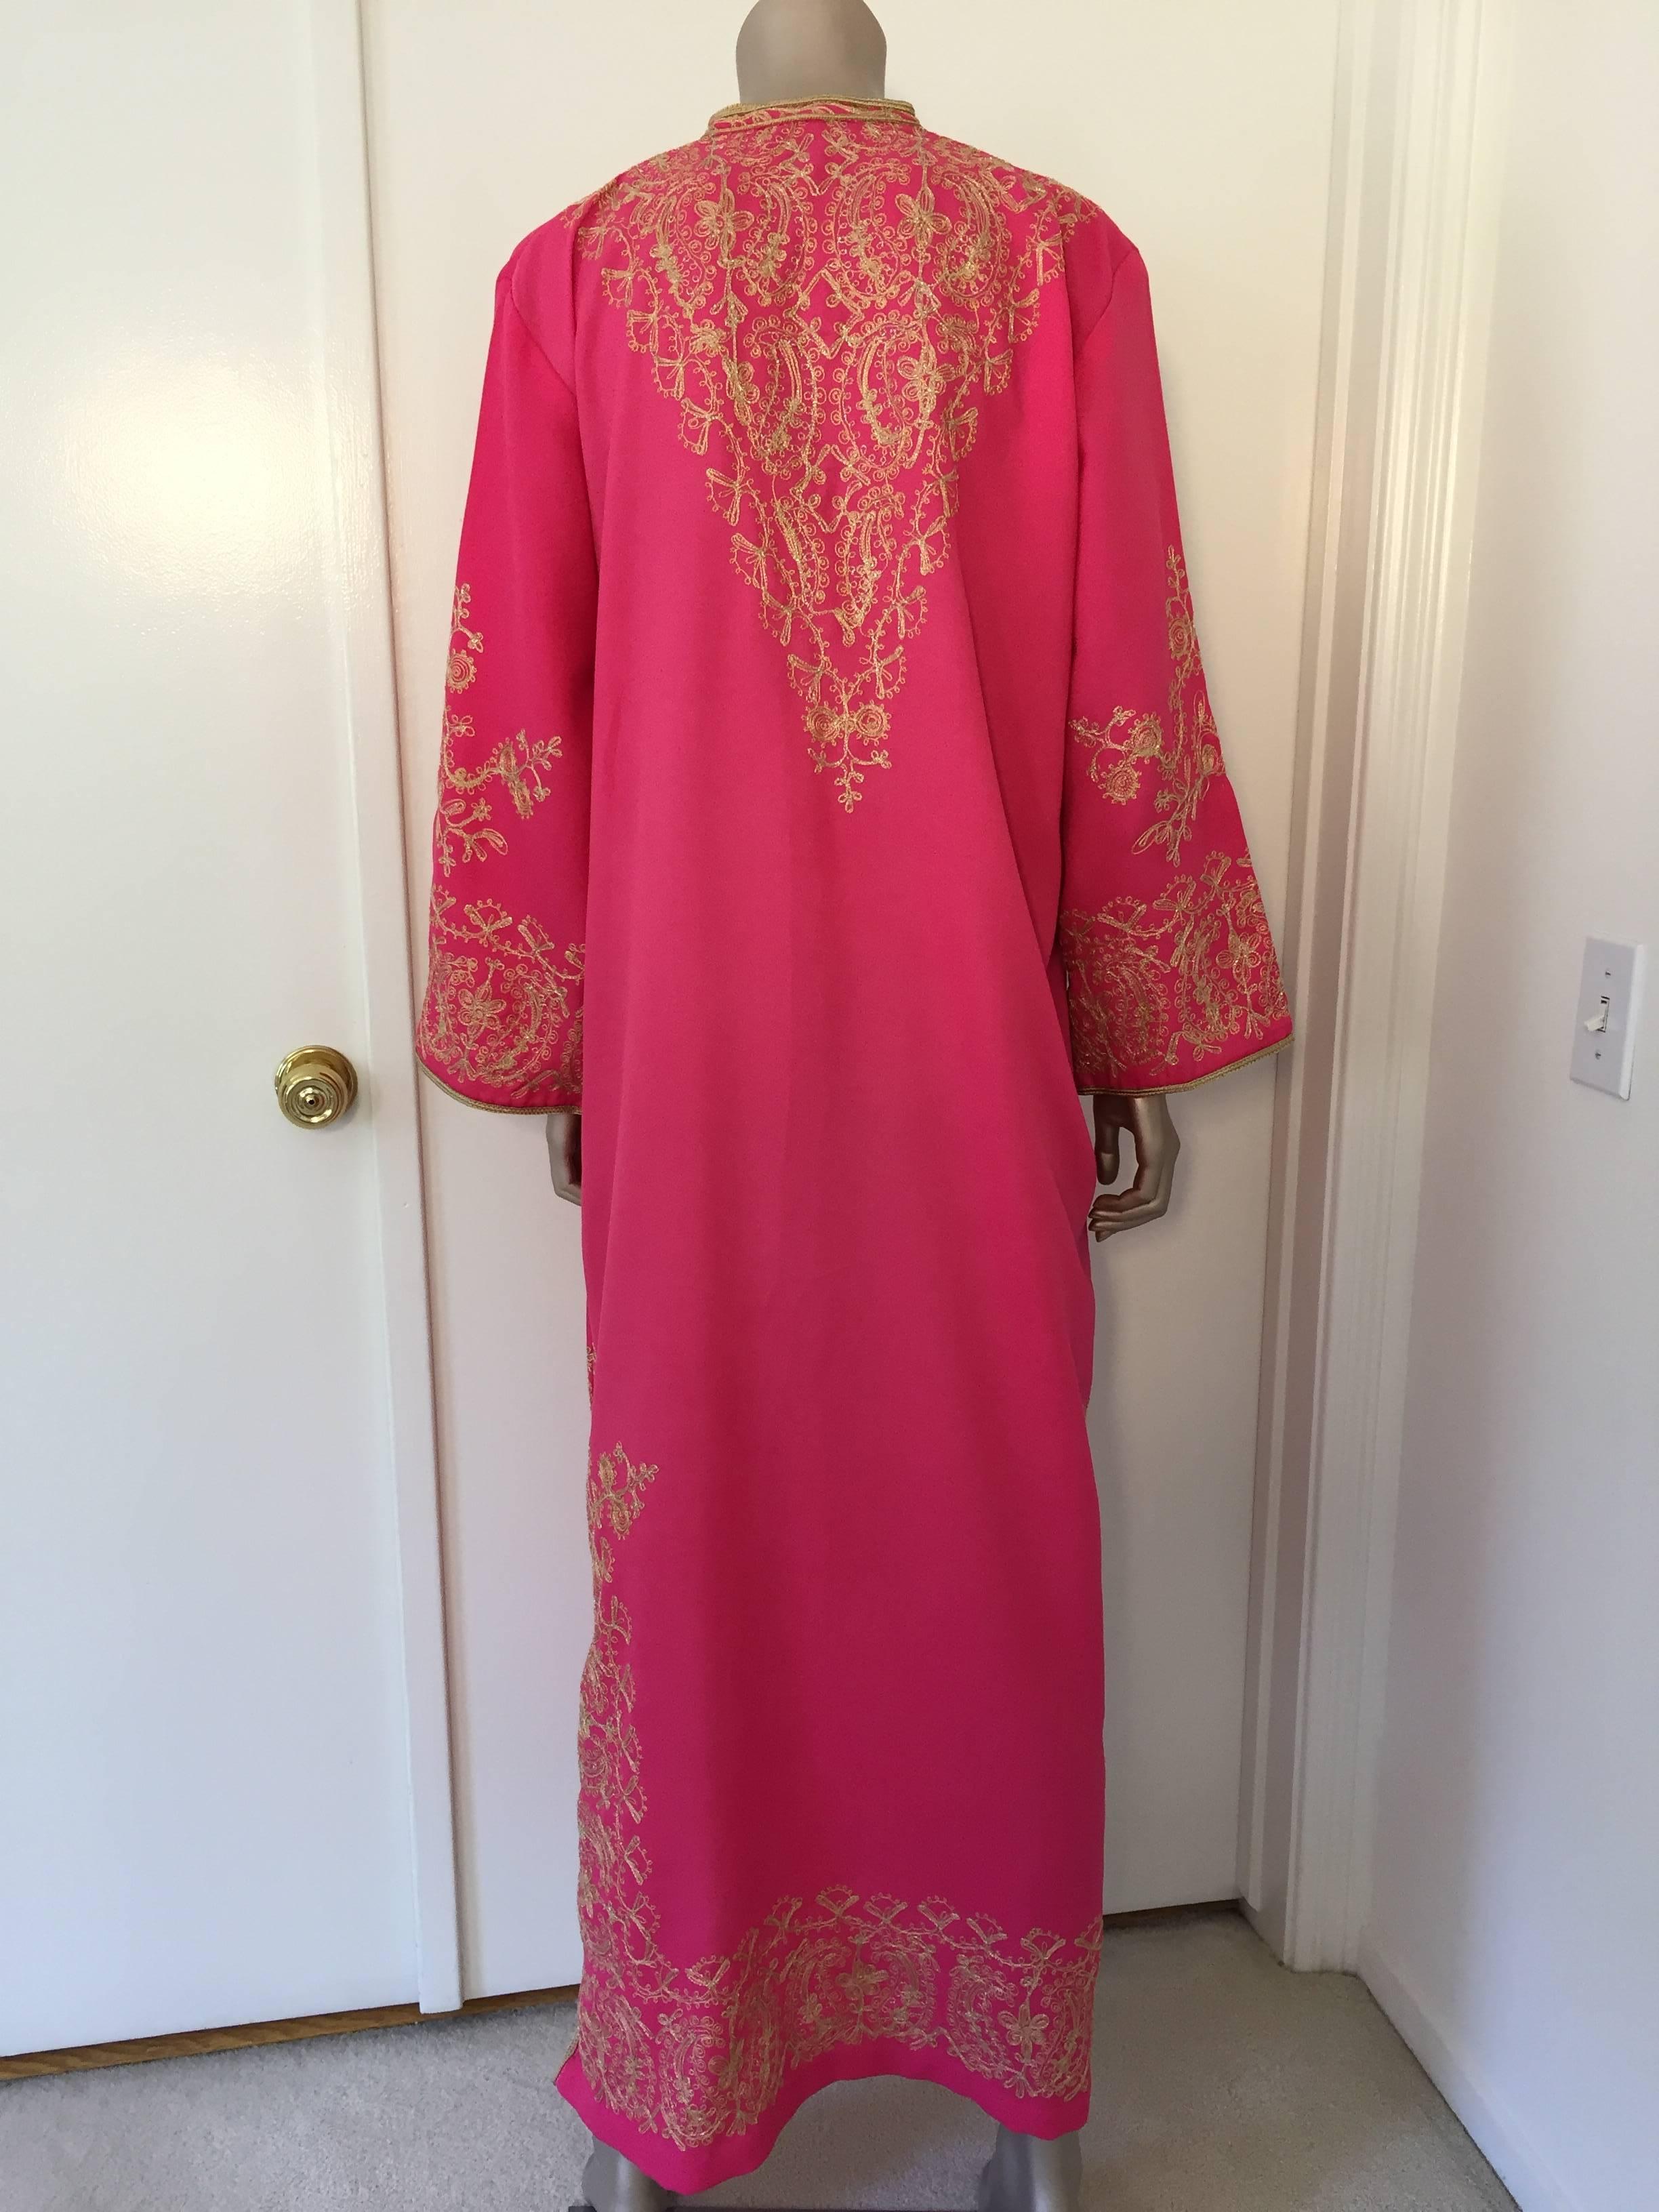 20th Century Moroccan Caftan Hot Pink with Gold Embroideries Size L